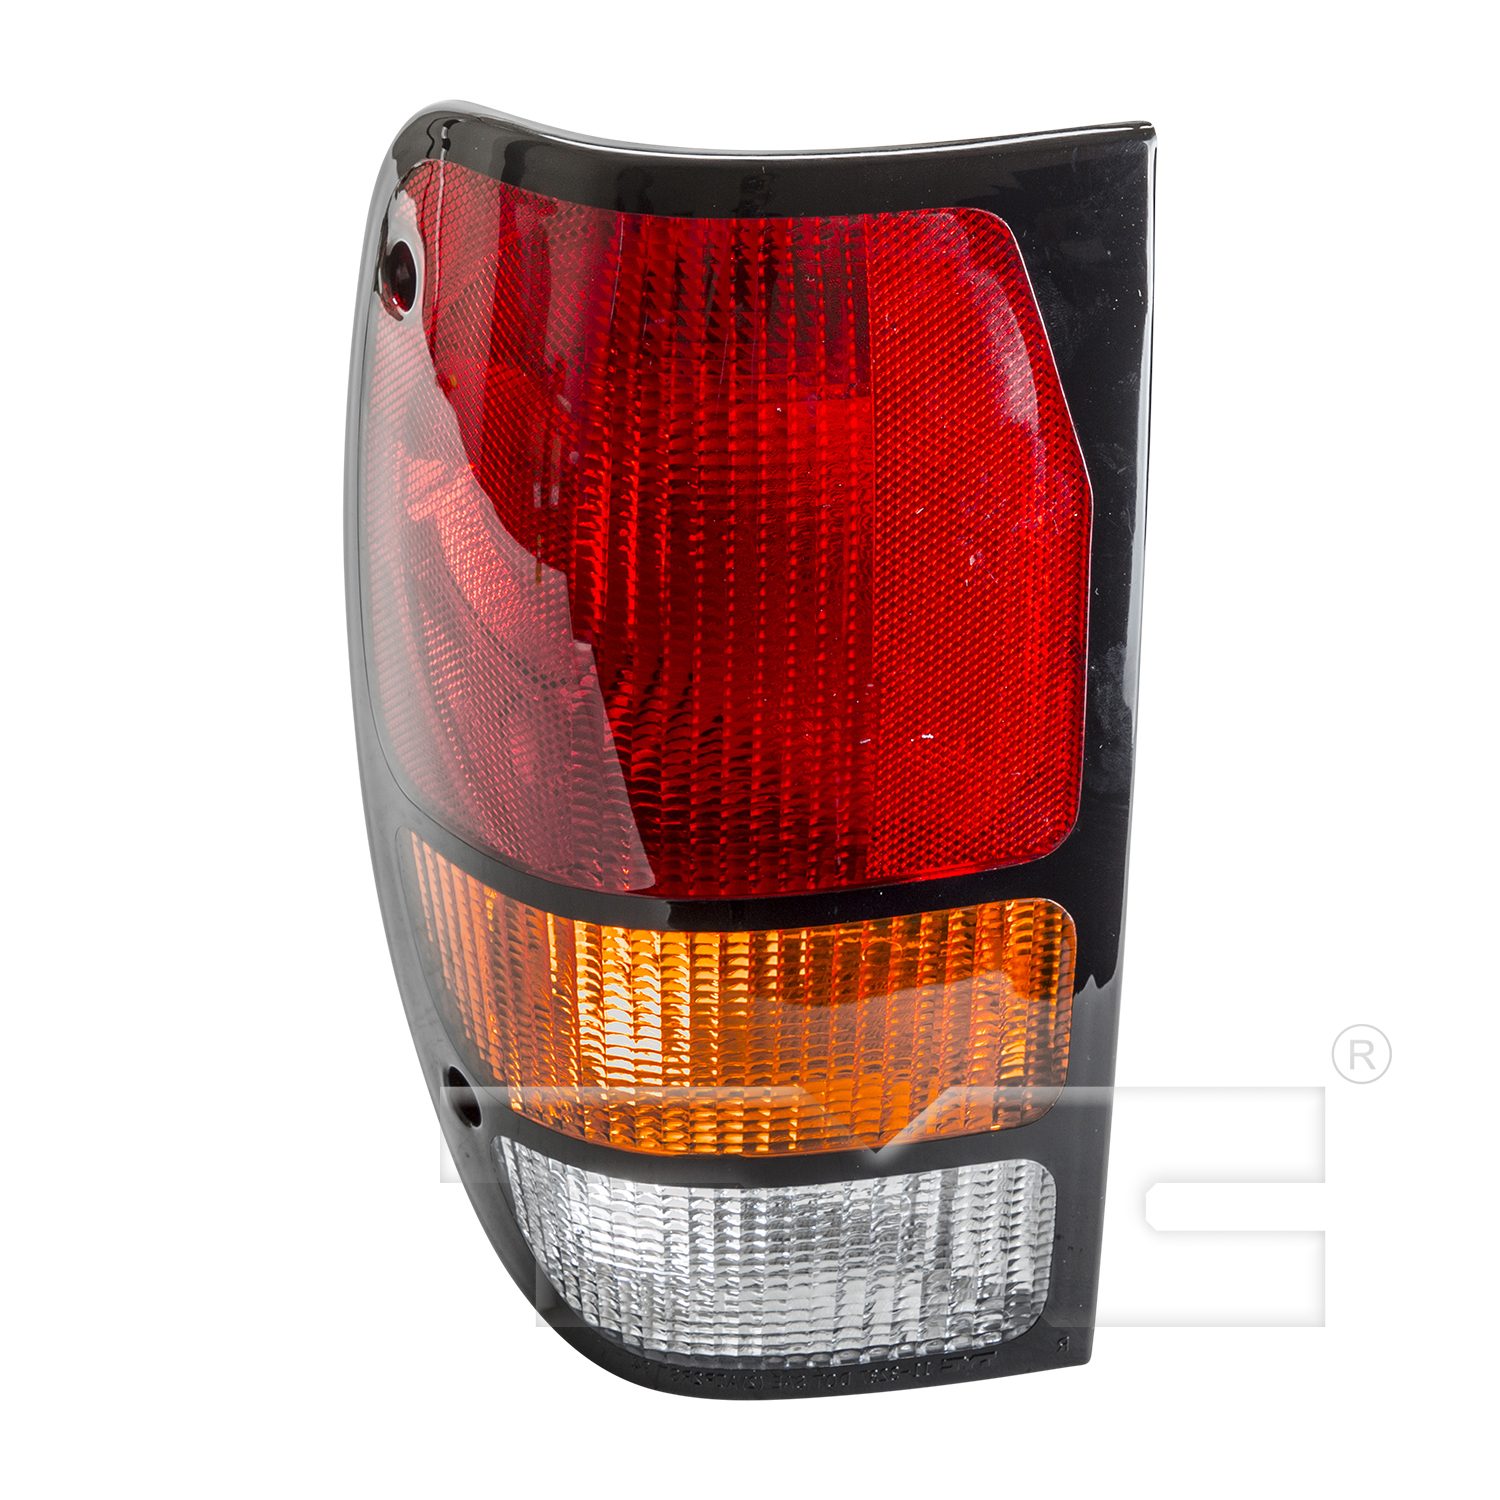 Aftermarket TAILLIGHTS for MAZDA - B2500, B2500,98-00,LT Taillamp assy